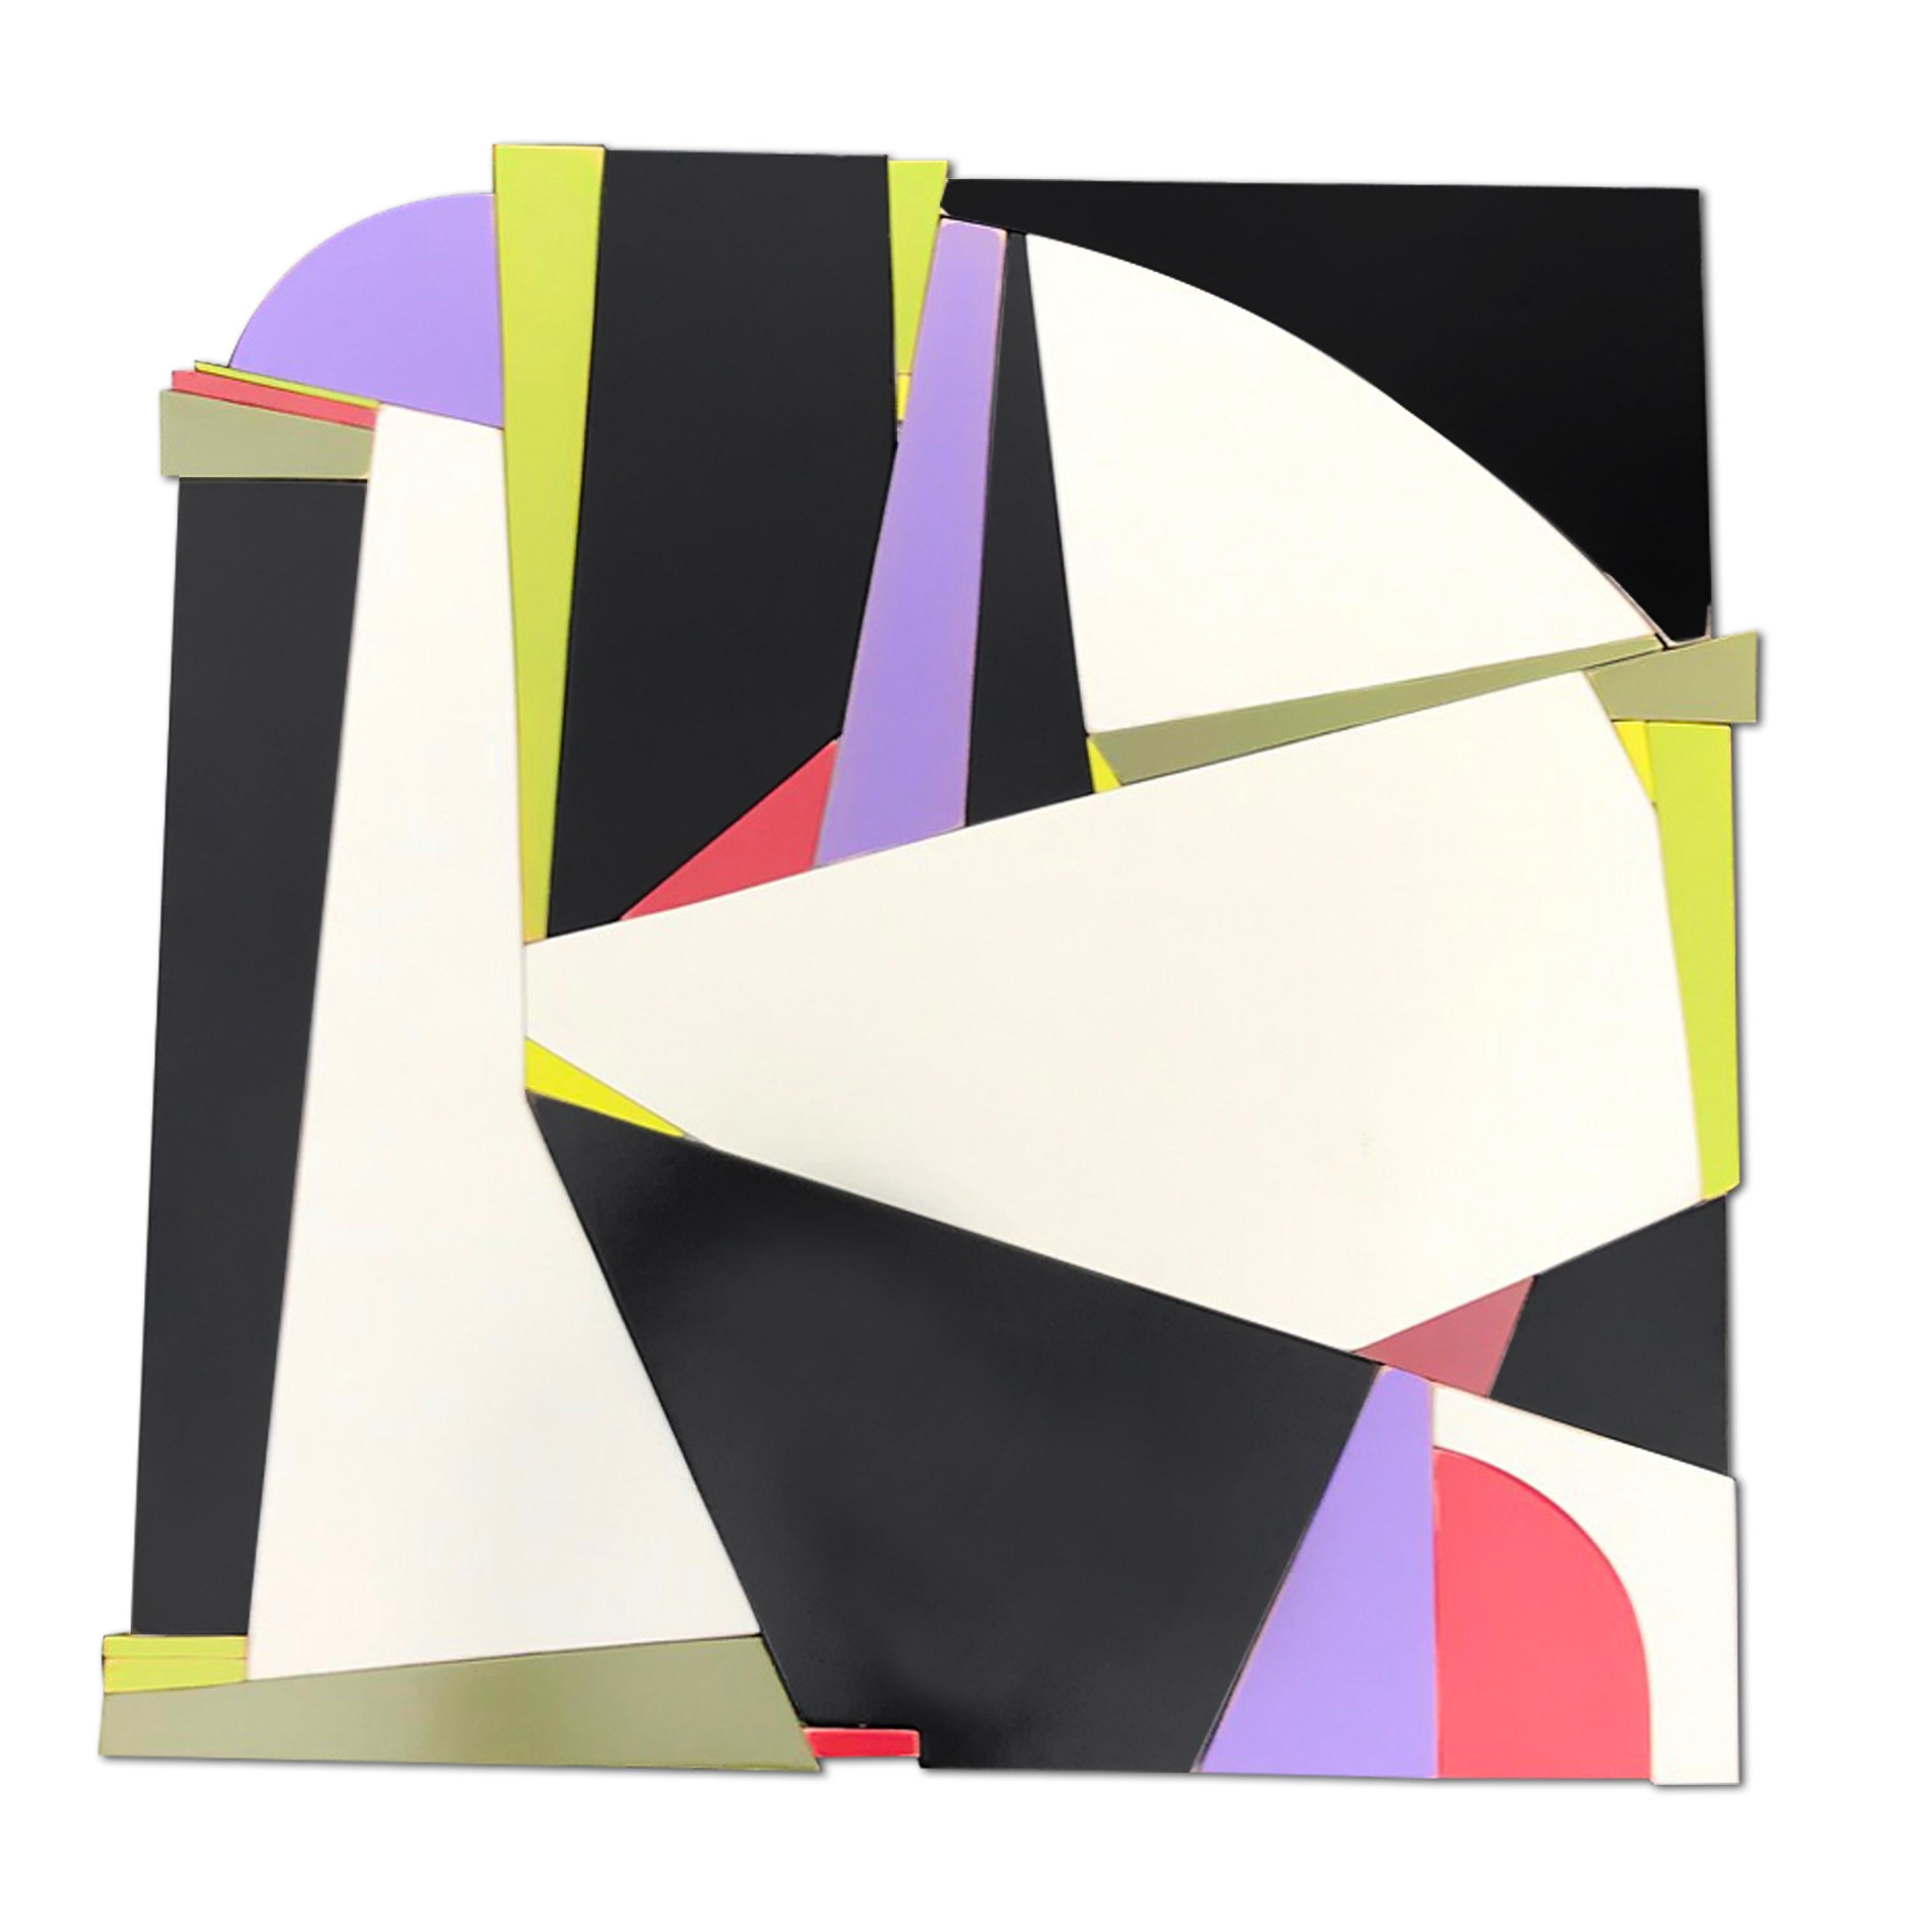 Martini (modern black and white wall sculpture abstract geometric wood design)